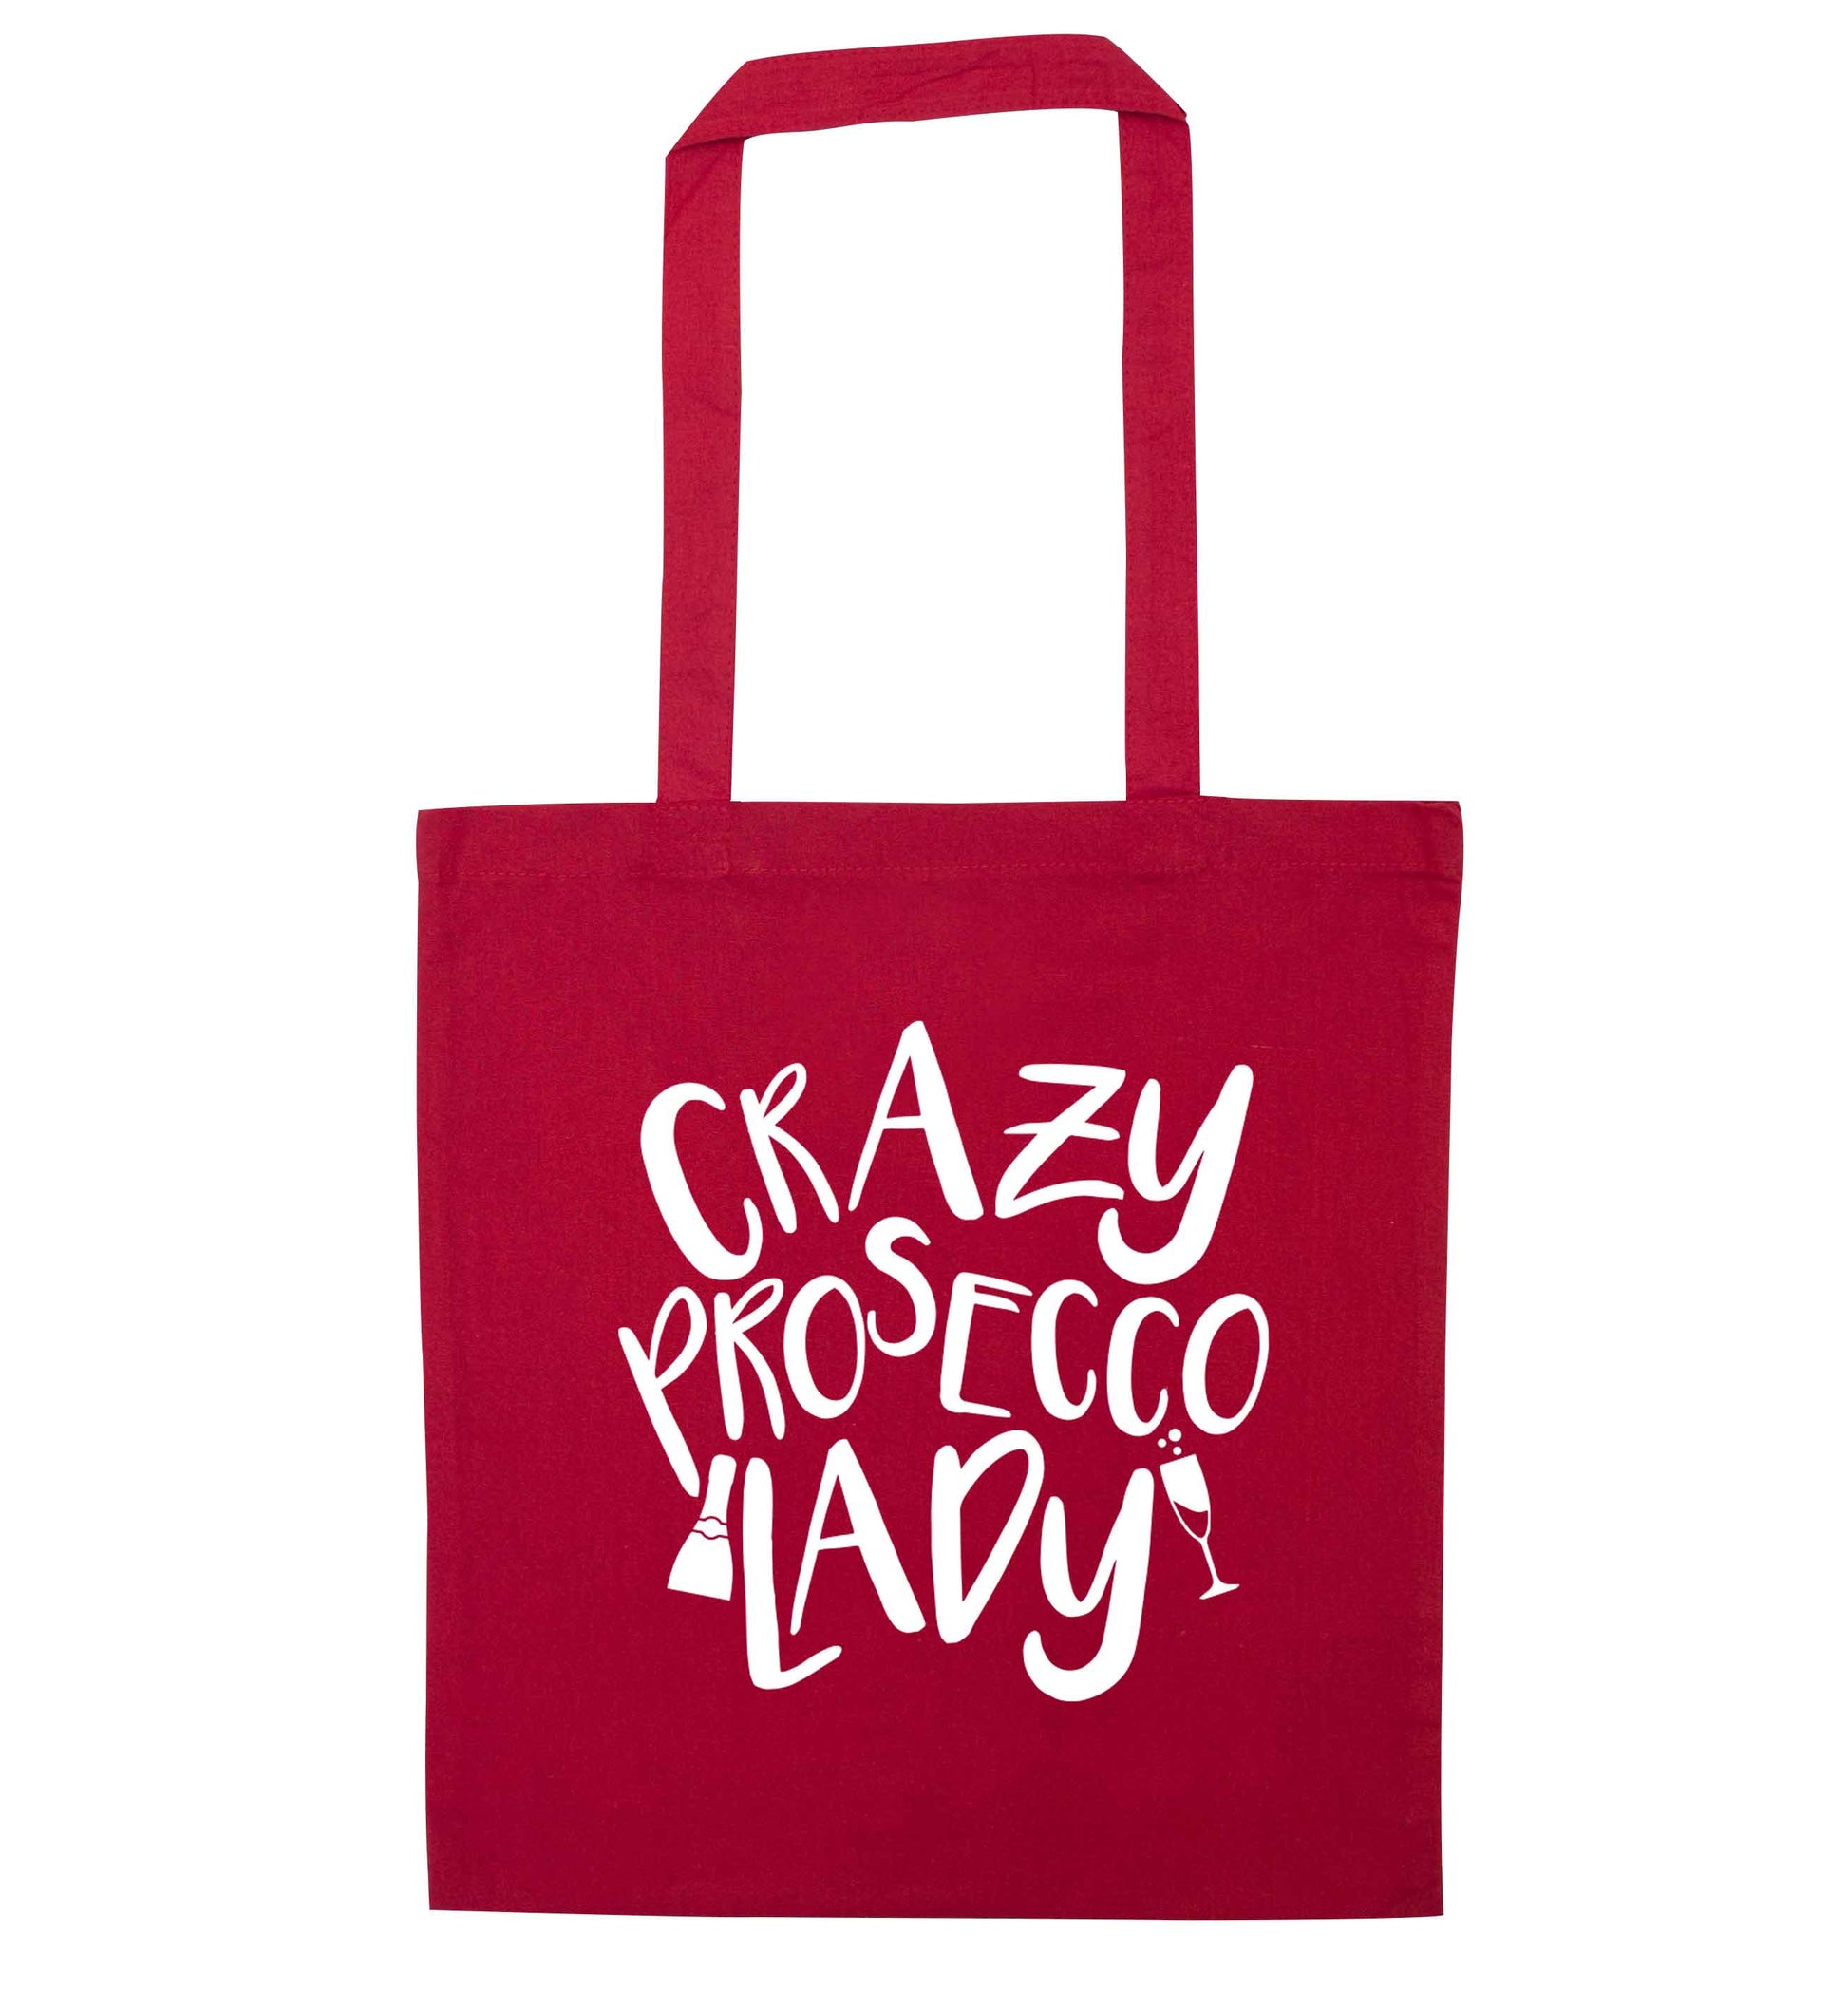 Crazy prosecco lady red tote bag